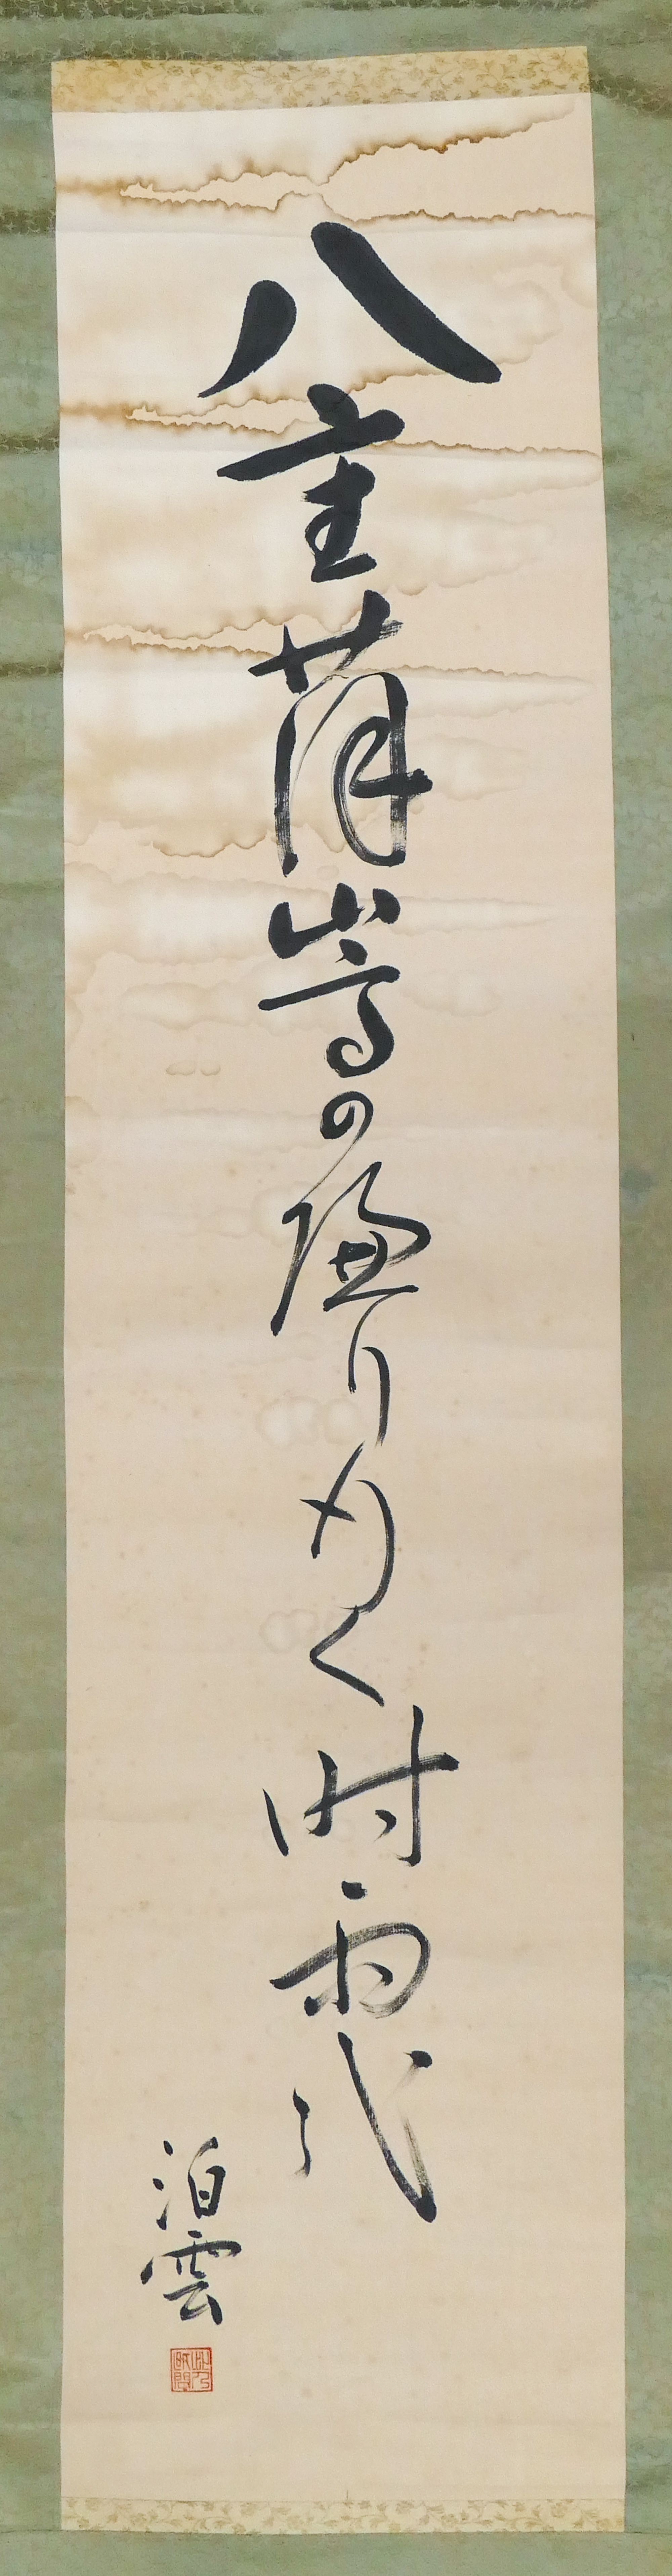 Chinese Calligraphy Scroll Painting 3cfb9f